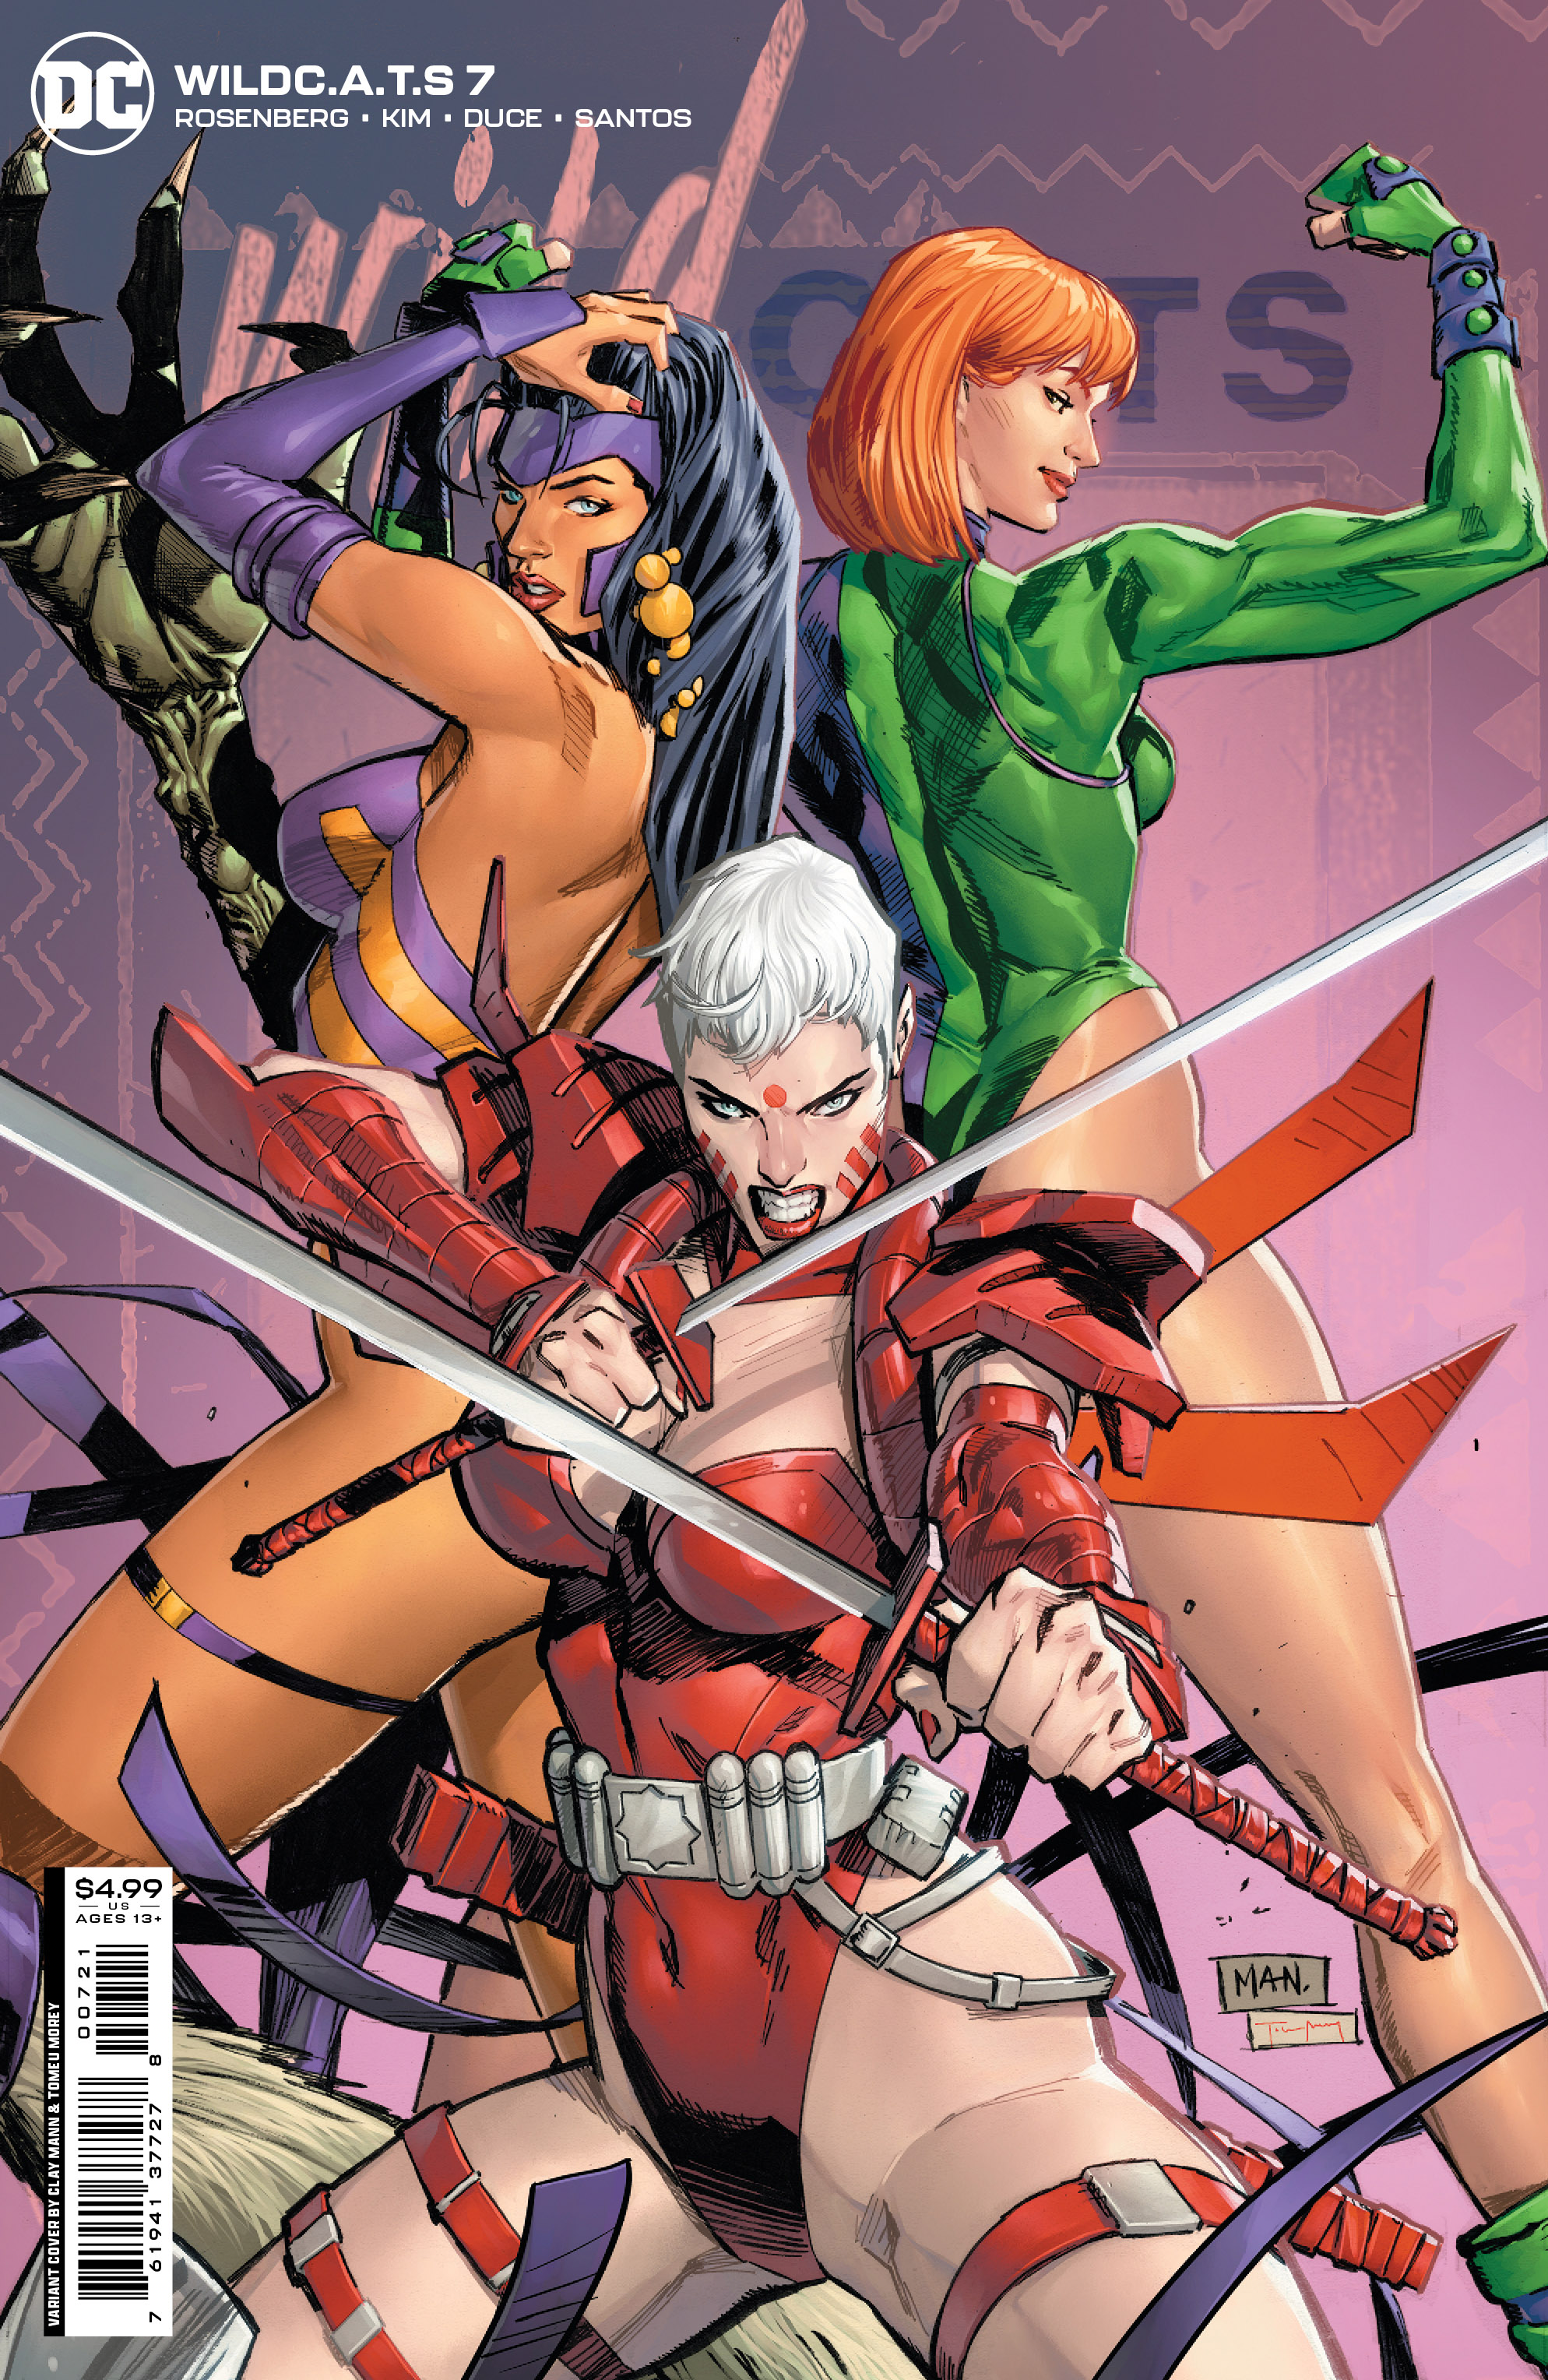 DC: Wildcats #7 (Cover B Clay Mann Card Stock Variant) from